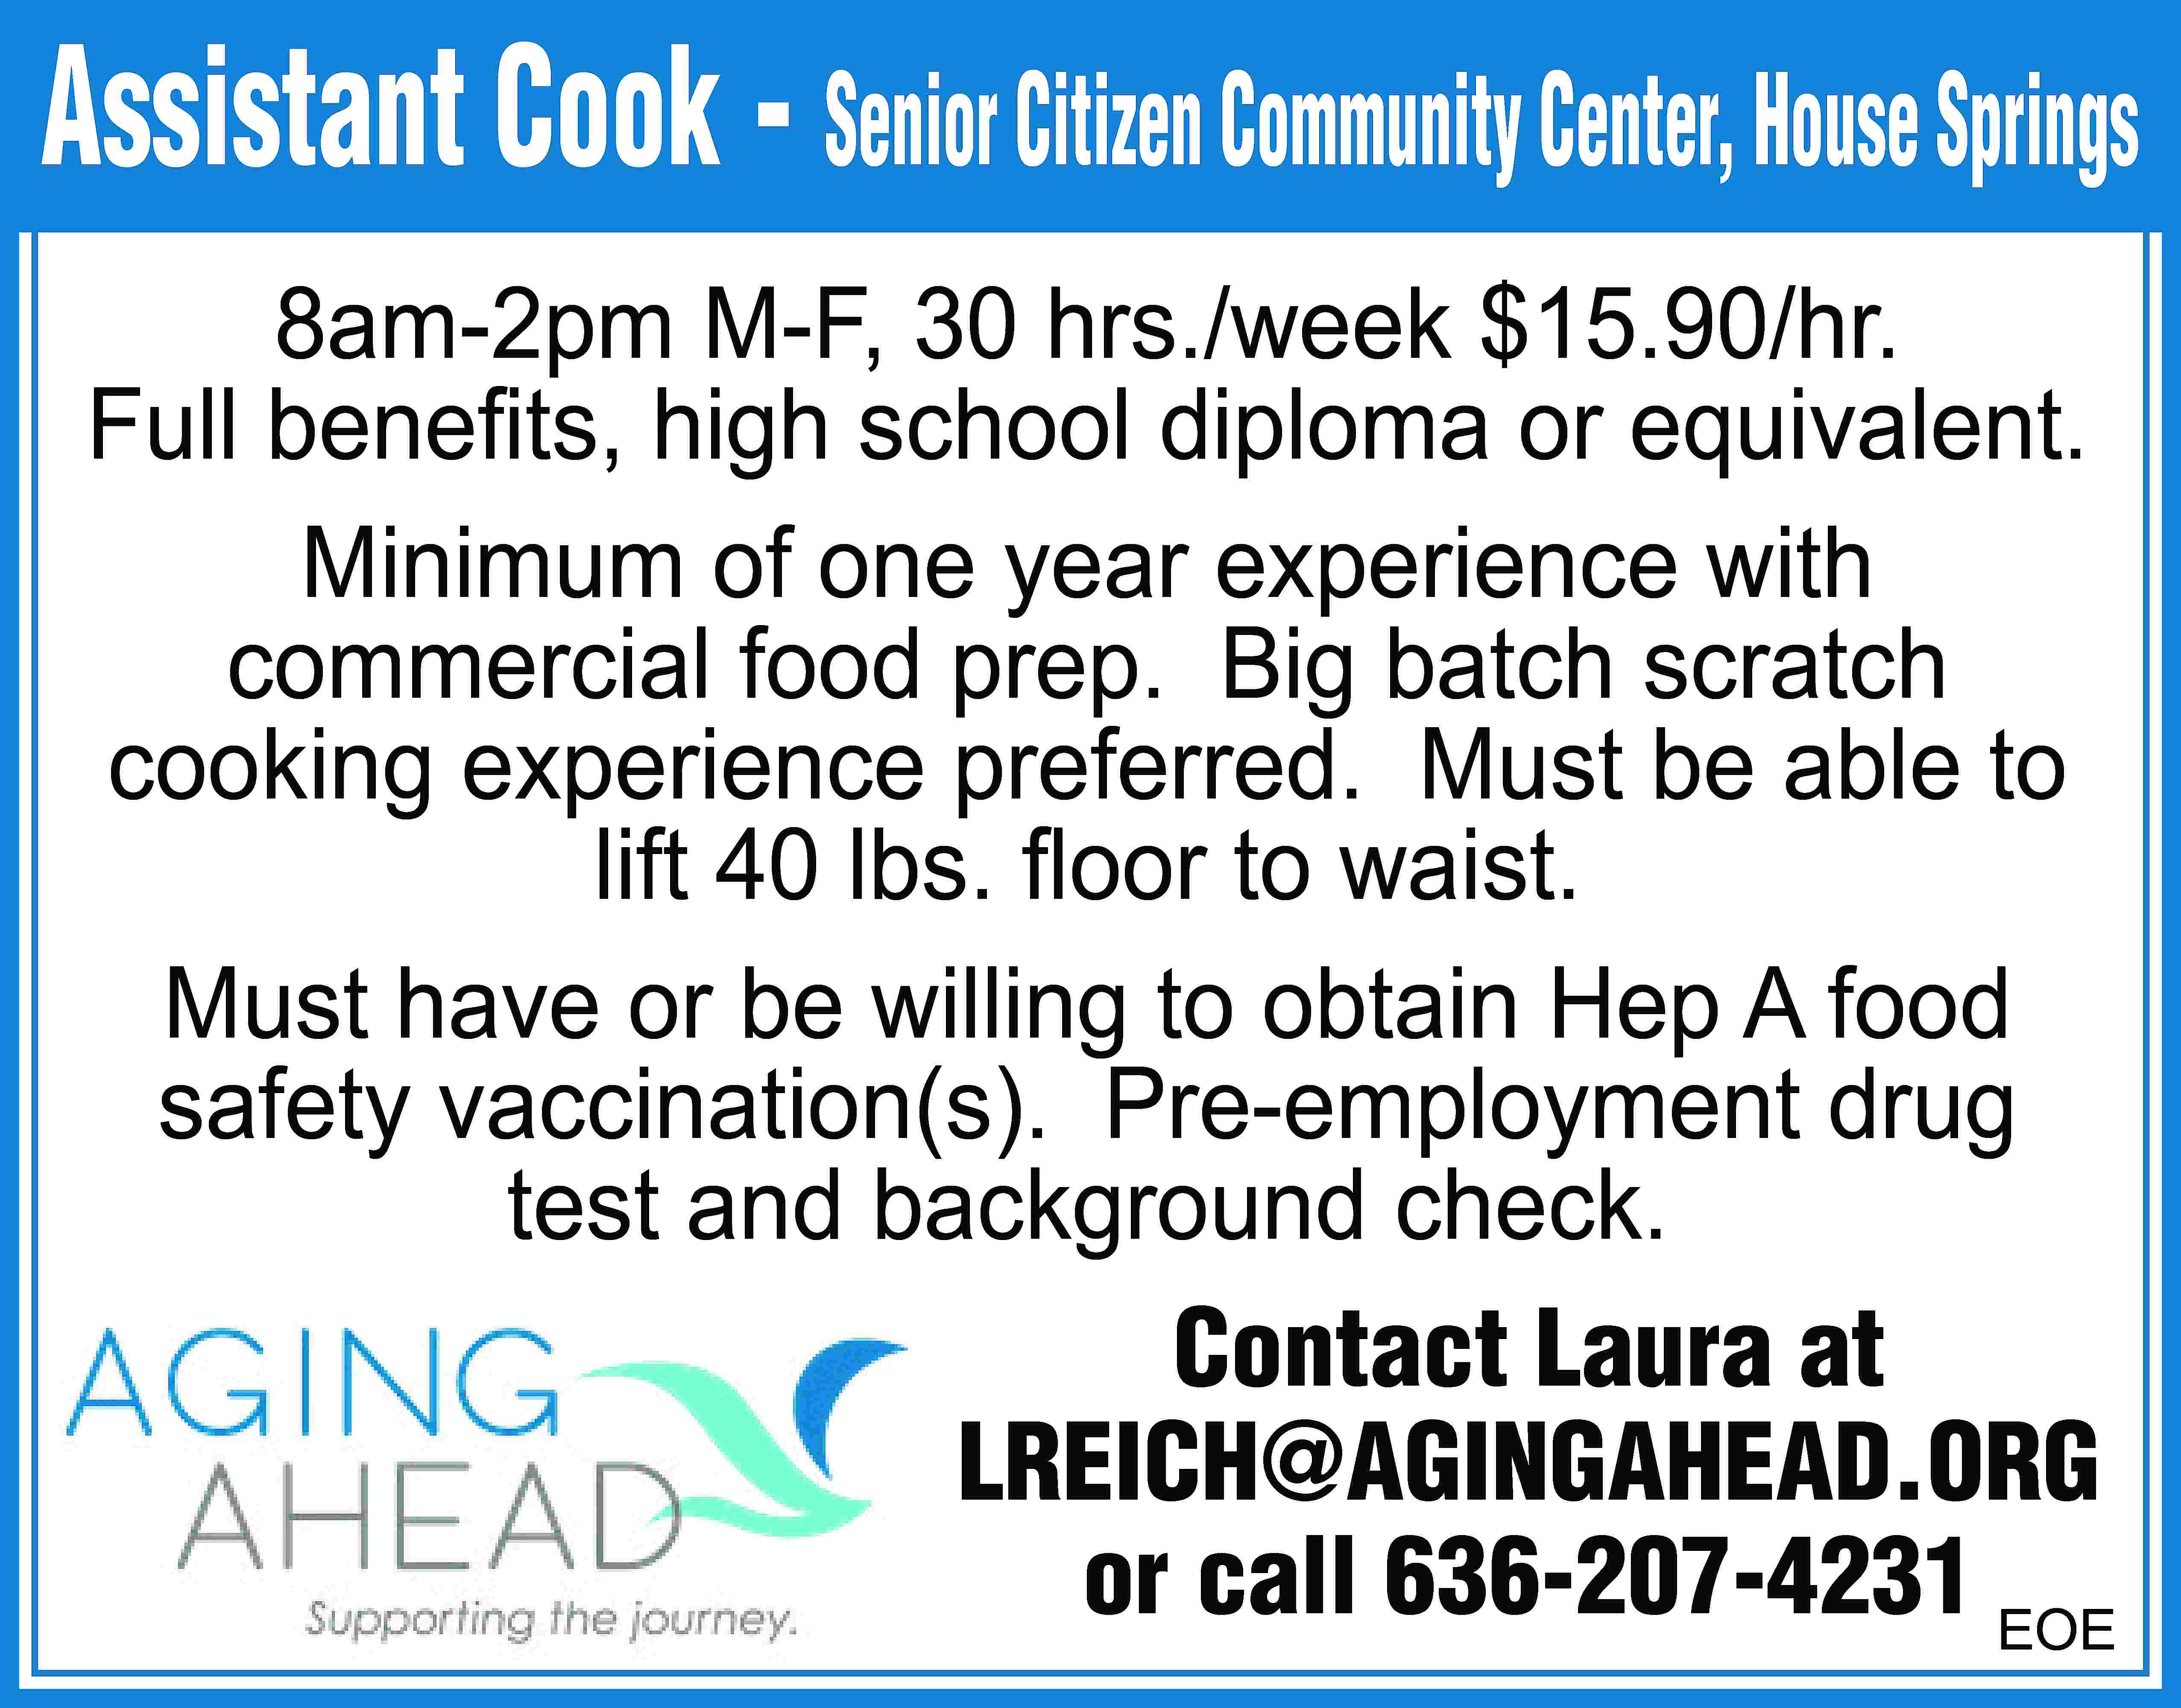 Assistant Cook - Senior Citizen  Assistant Cook - Senior Citizen Community Center, House Springs 8am-2pm M-F, 30 hrs./week $15.90/hr. Full beneﬁts, high school diploma or equivalent. Minimum of one year experience with commercial food prep. Big batch scratch cooking experience preferred. Must be able to lift 40 lbs. ﬂoor to waist. Must have or be willing to obtain Hep A food safety vaccination(s). Pre-employment drug test and background check. Contact Laura at LREICH@AGINGAHEAD.ORG or call 636-207-4231 EOE